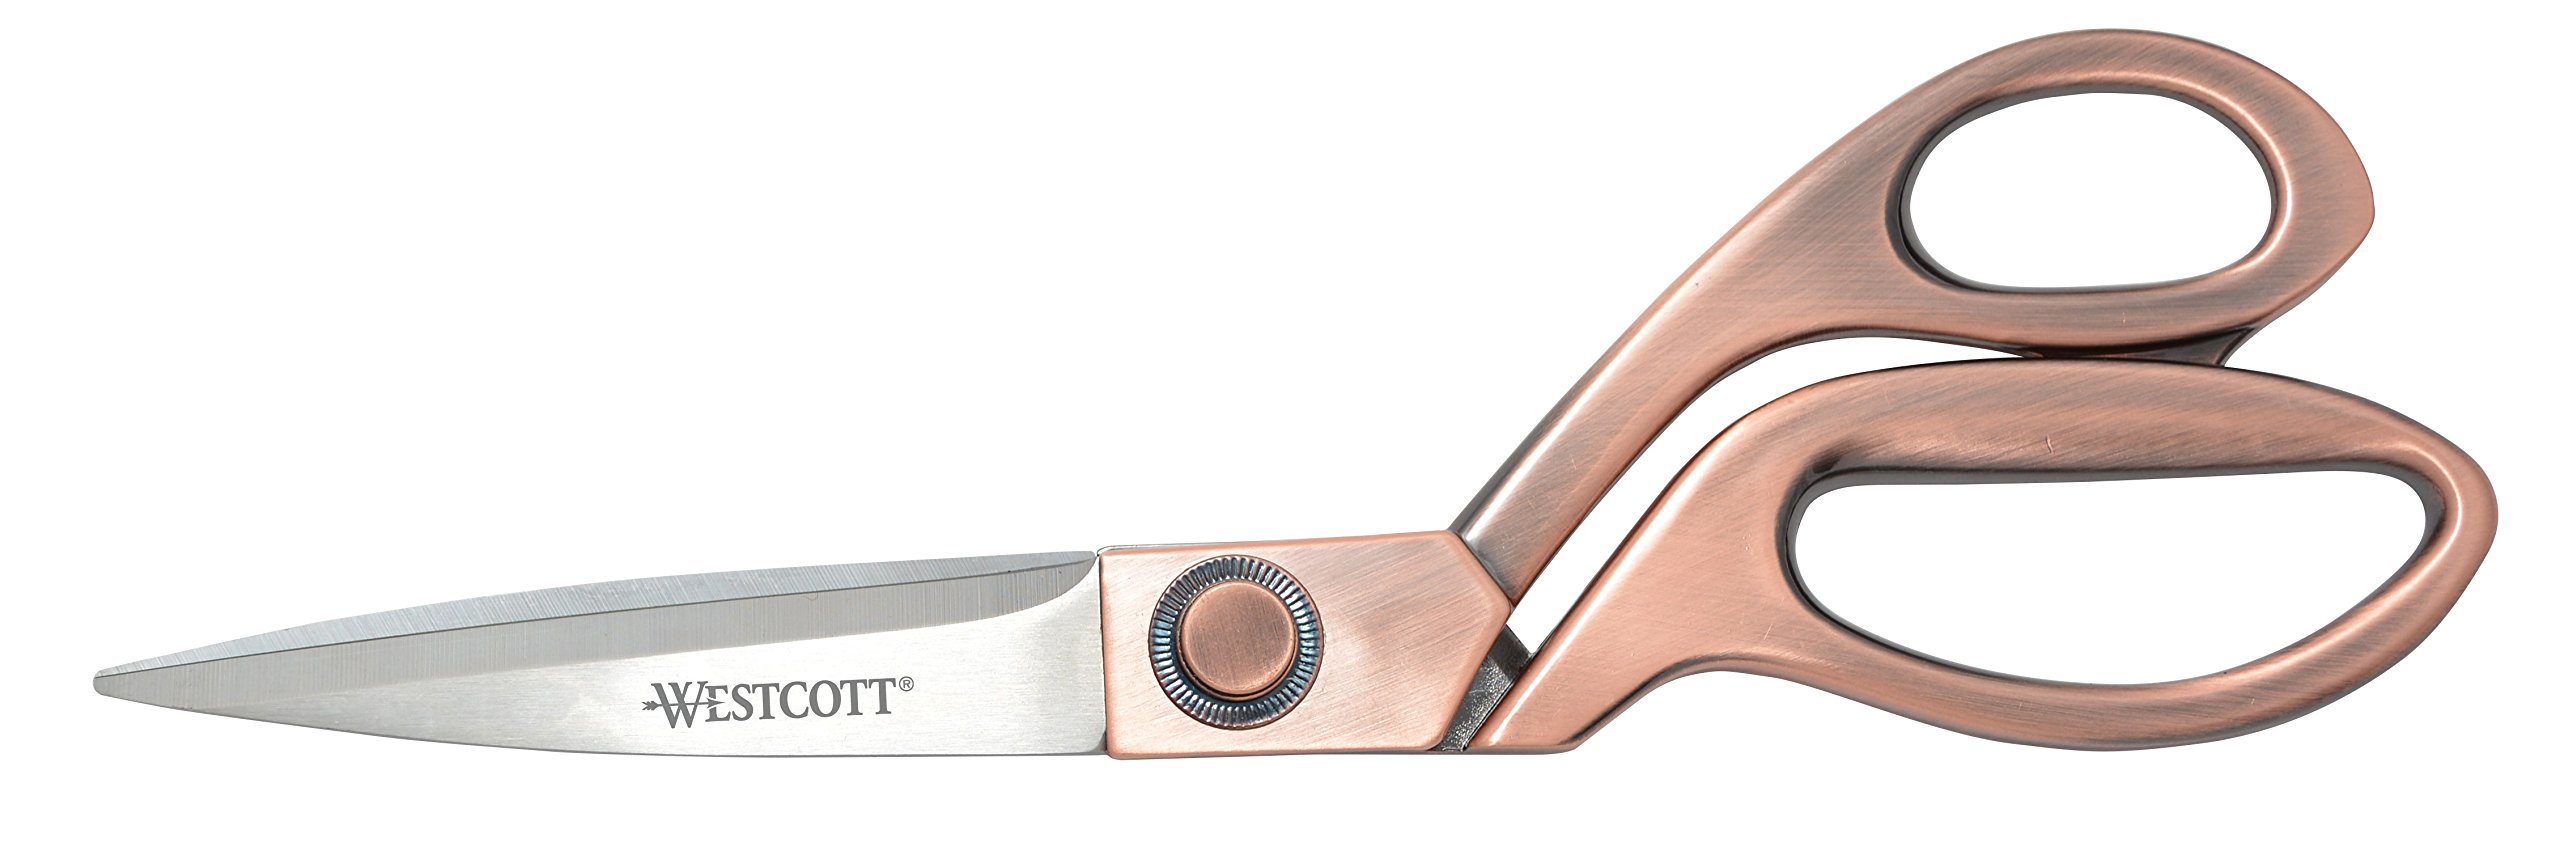 Westcott 16459 8-Inch Stainless Steel Copper-Finish Scissors For Office and Home